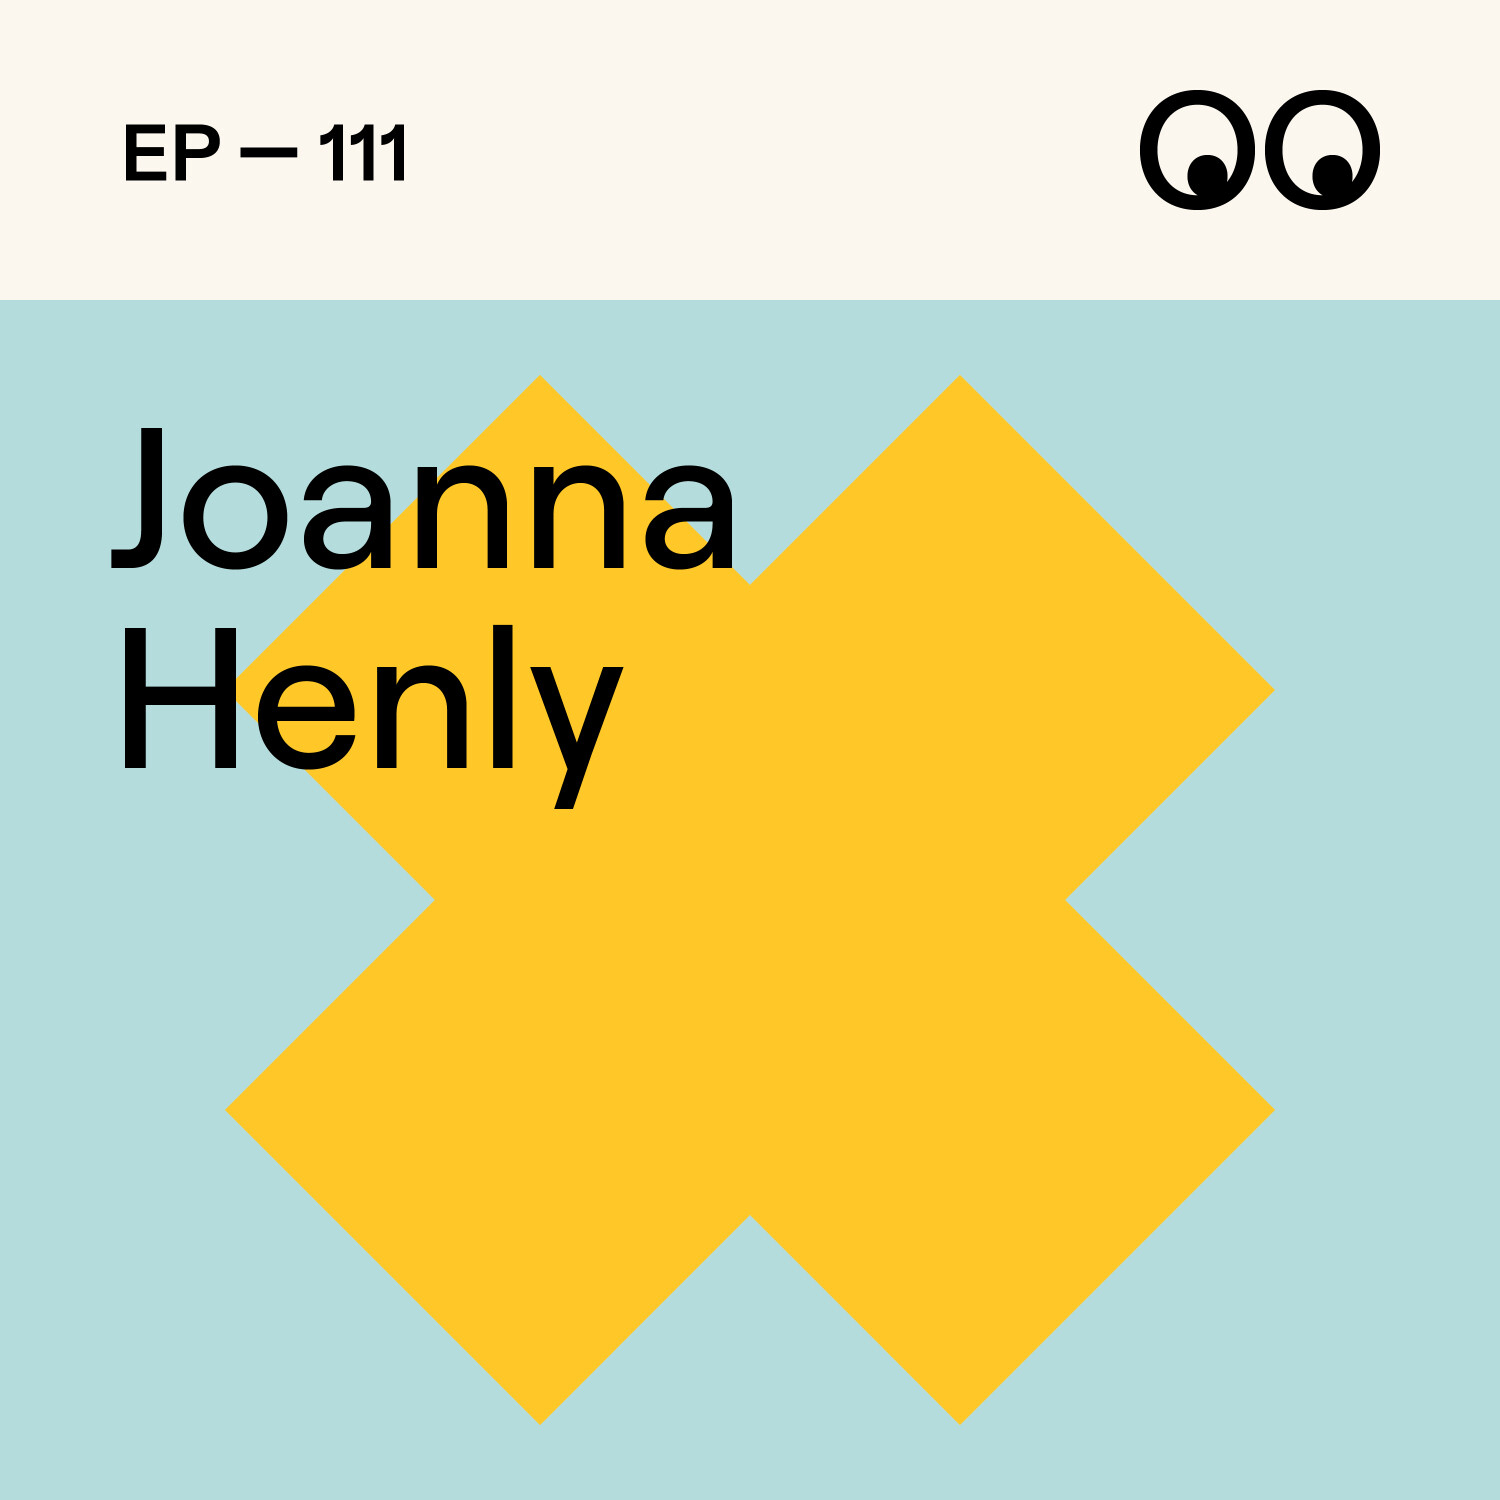 Feel the fear and do it anyway, with Joanna Henly